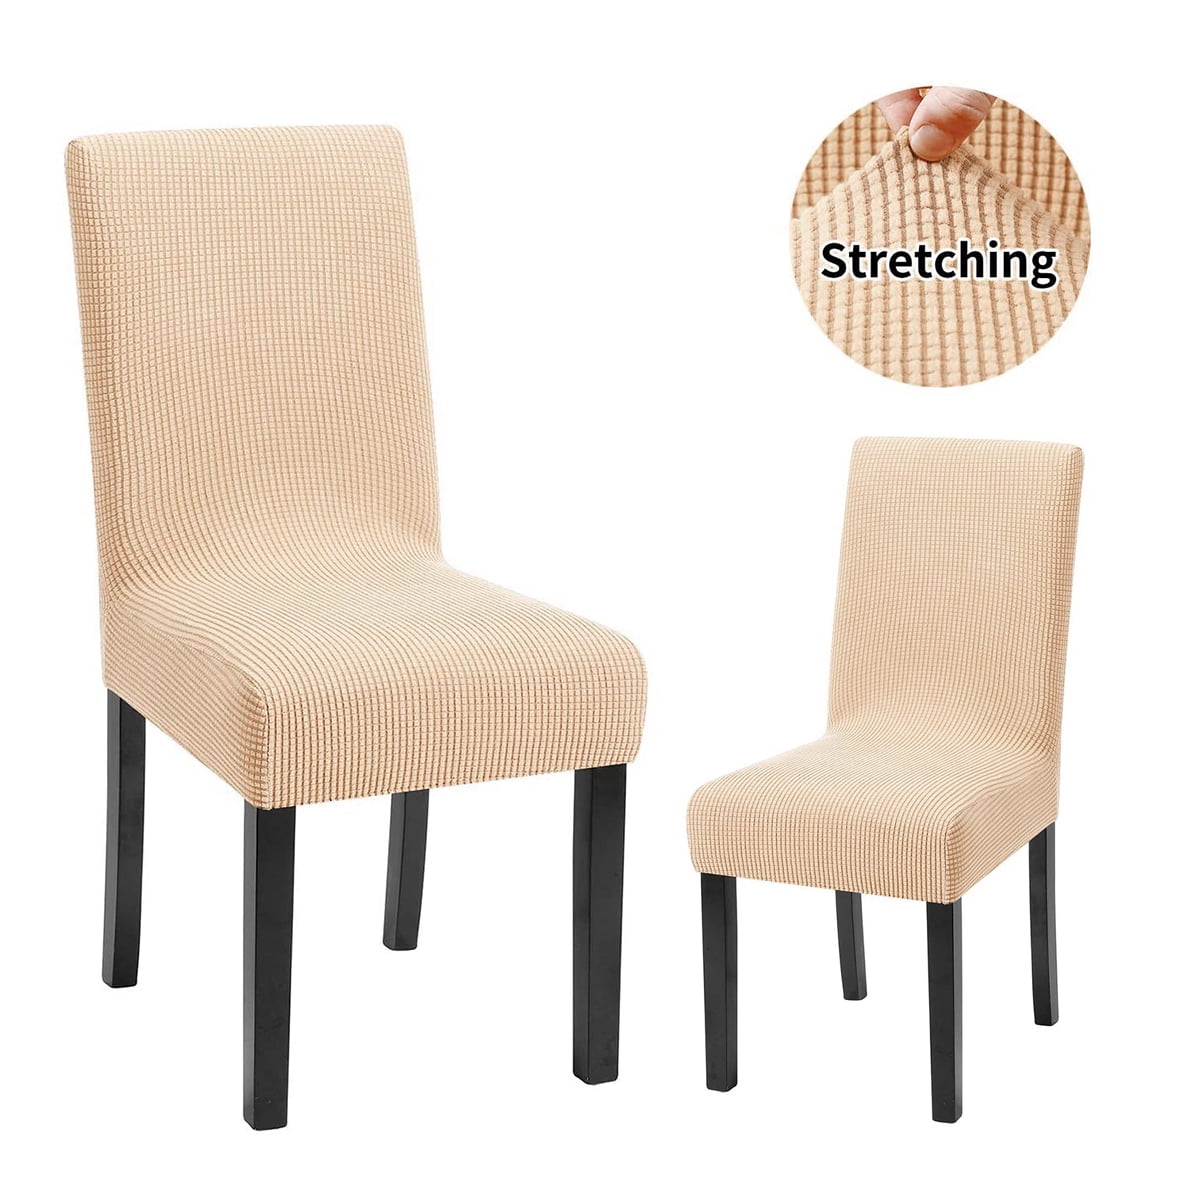 Details about   Stretch Dining Chair Covers Slipcovers Seat Protective Covers Dining Home De 